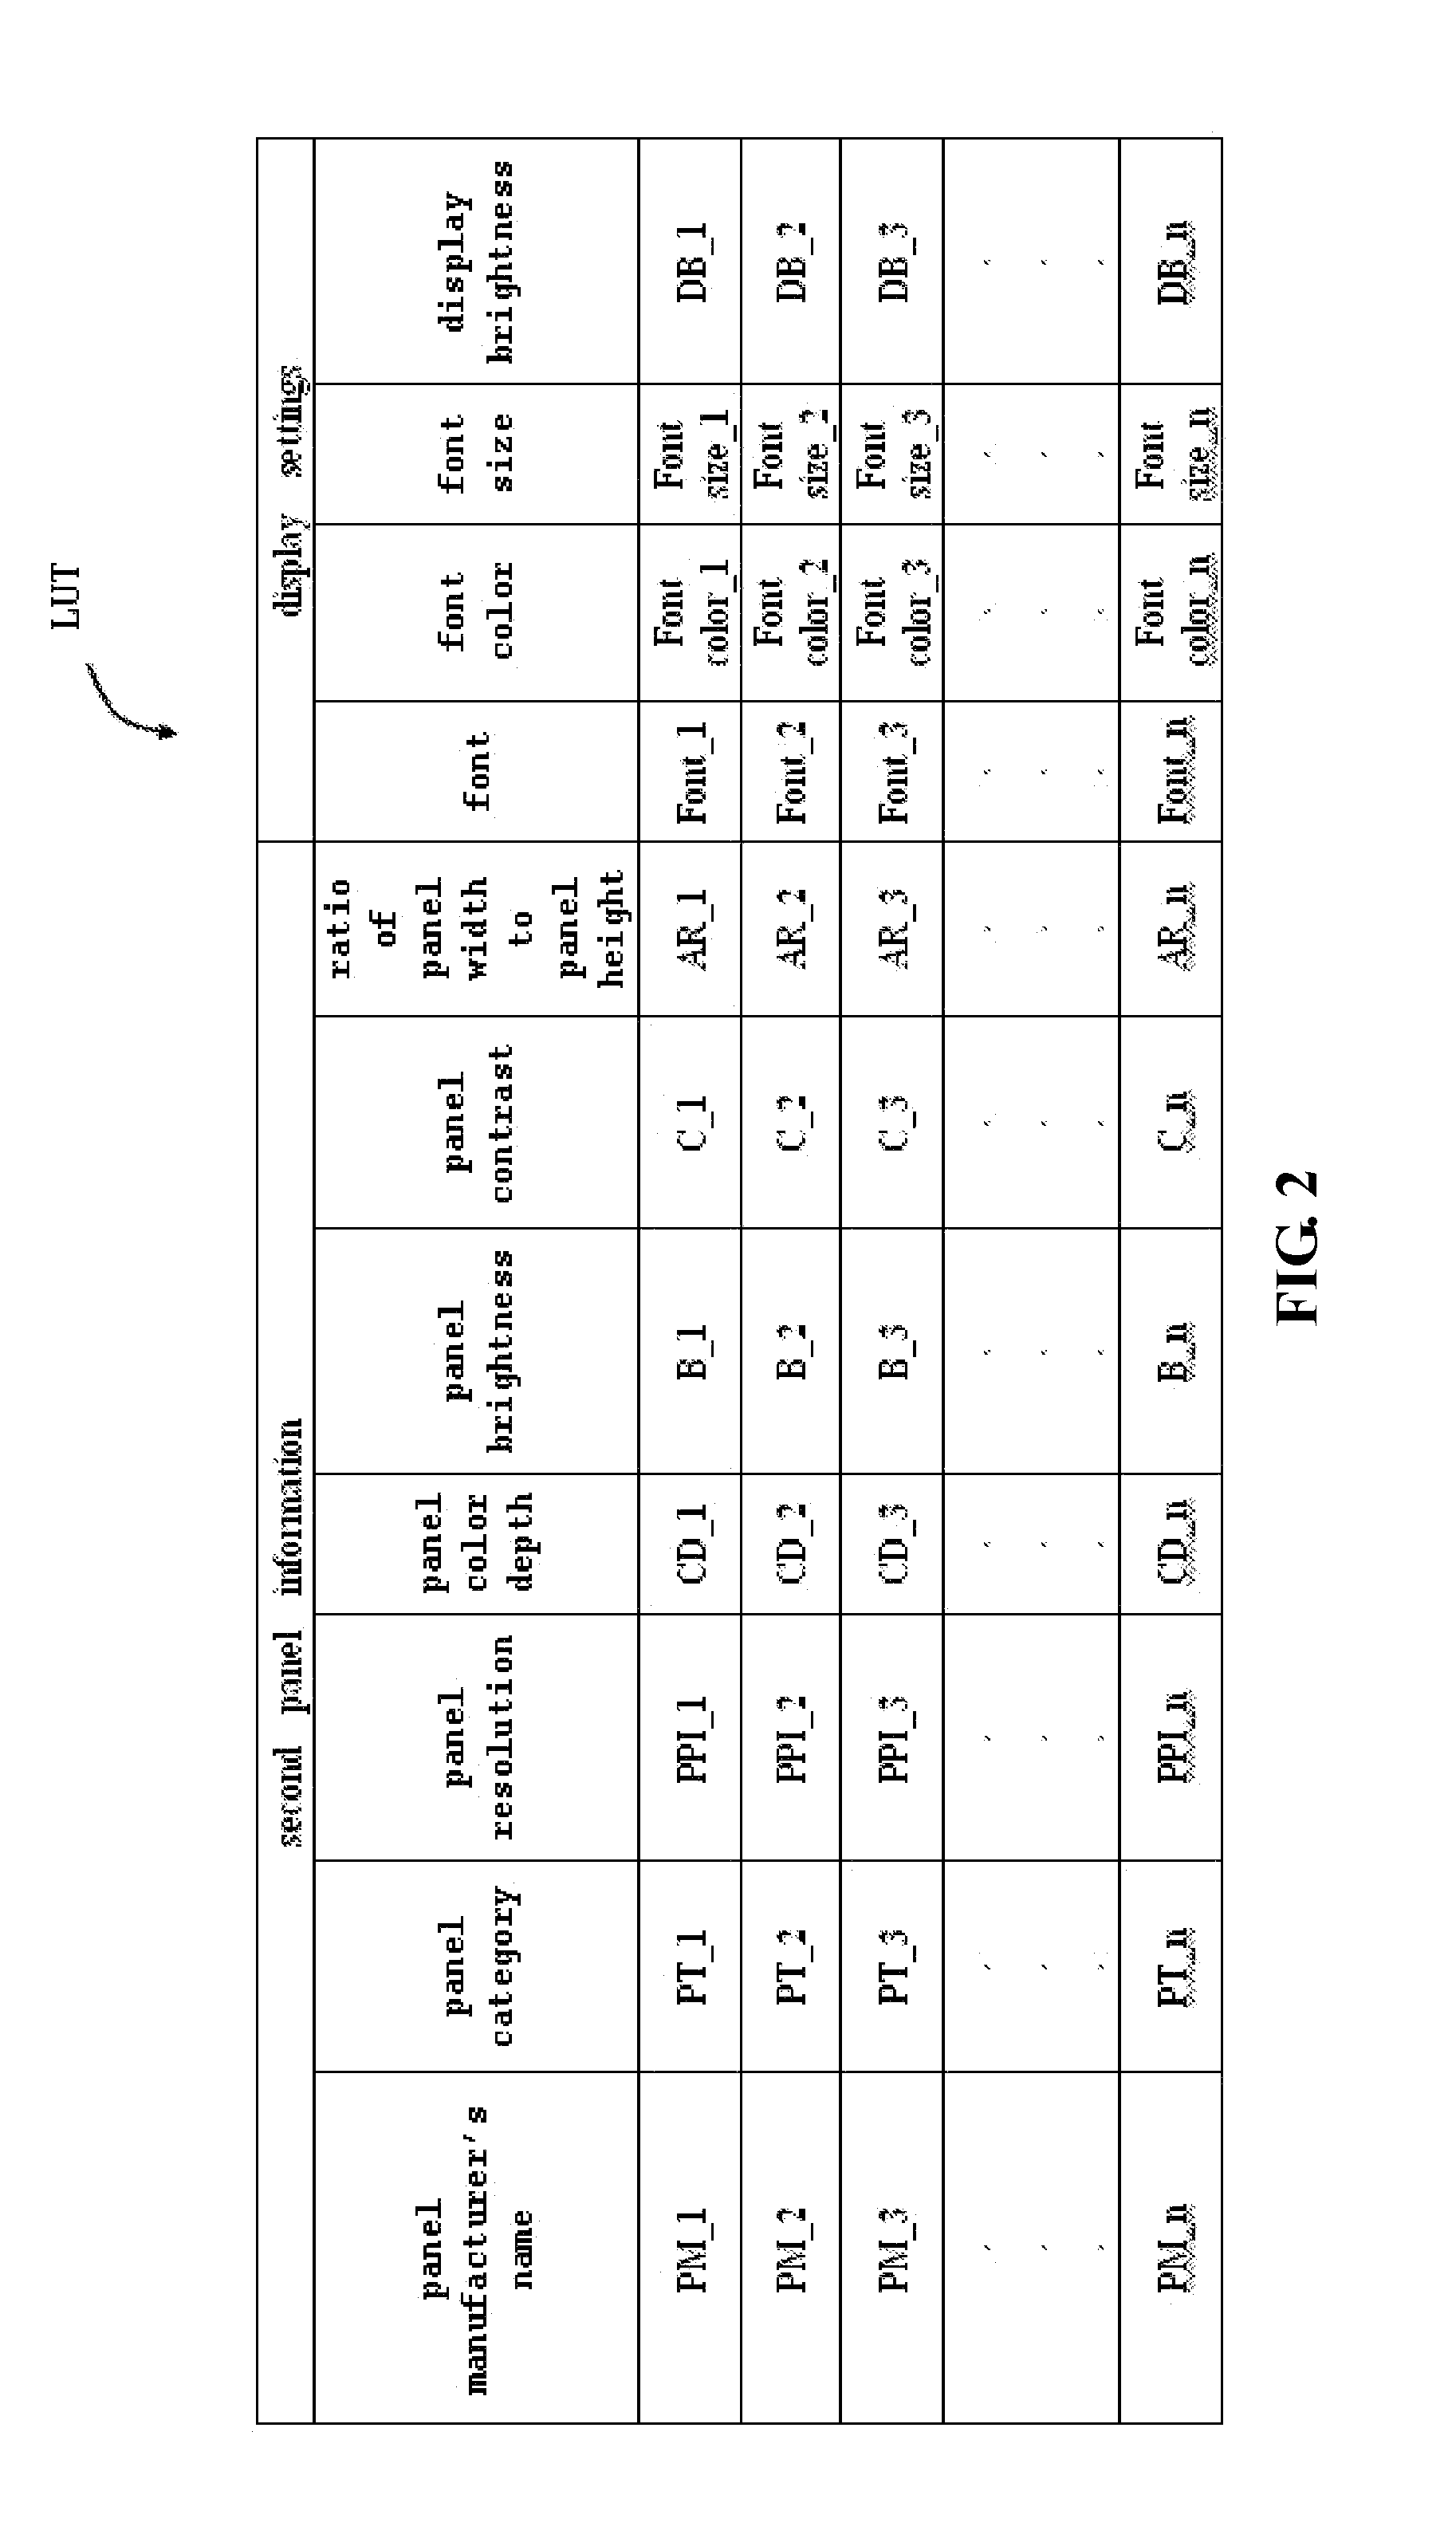 Document providing system, electronic device and display panel